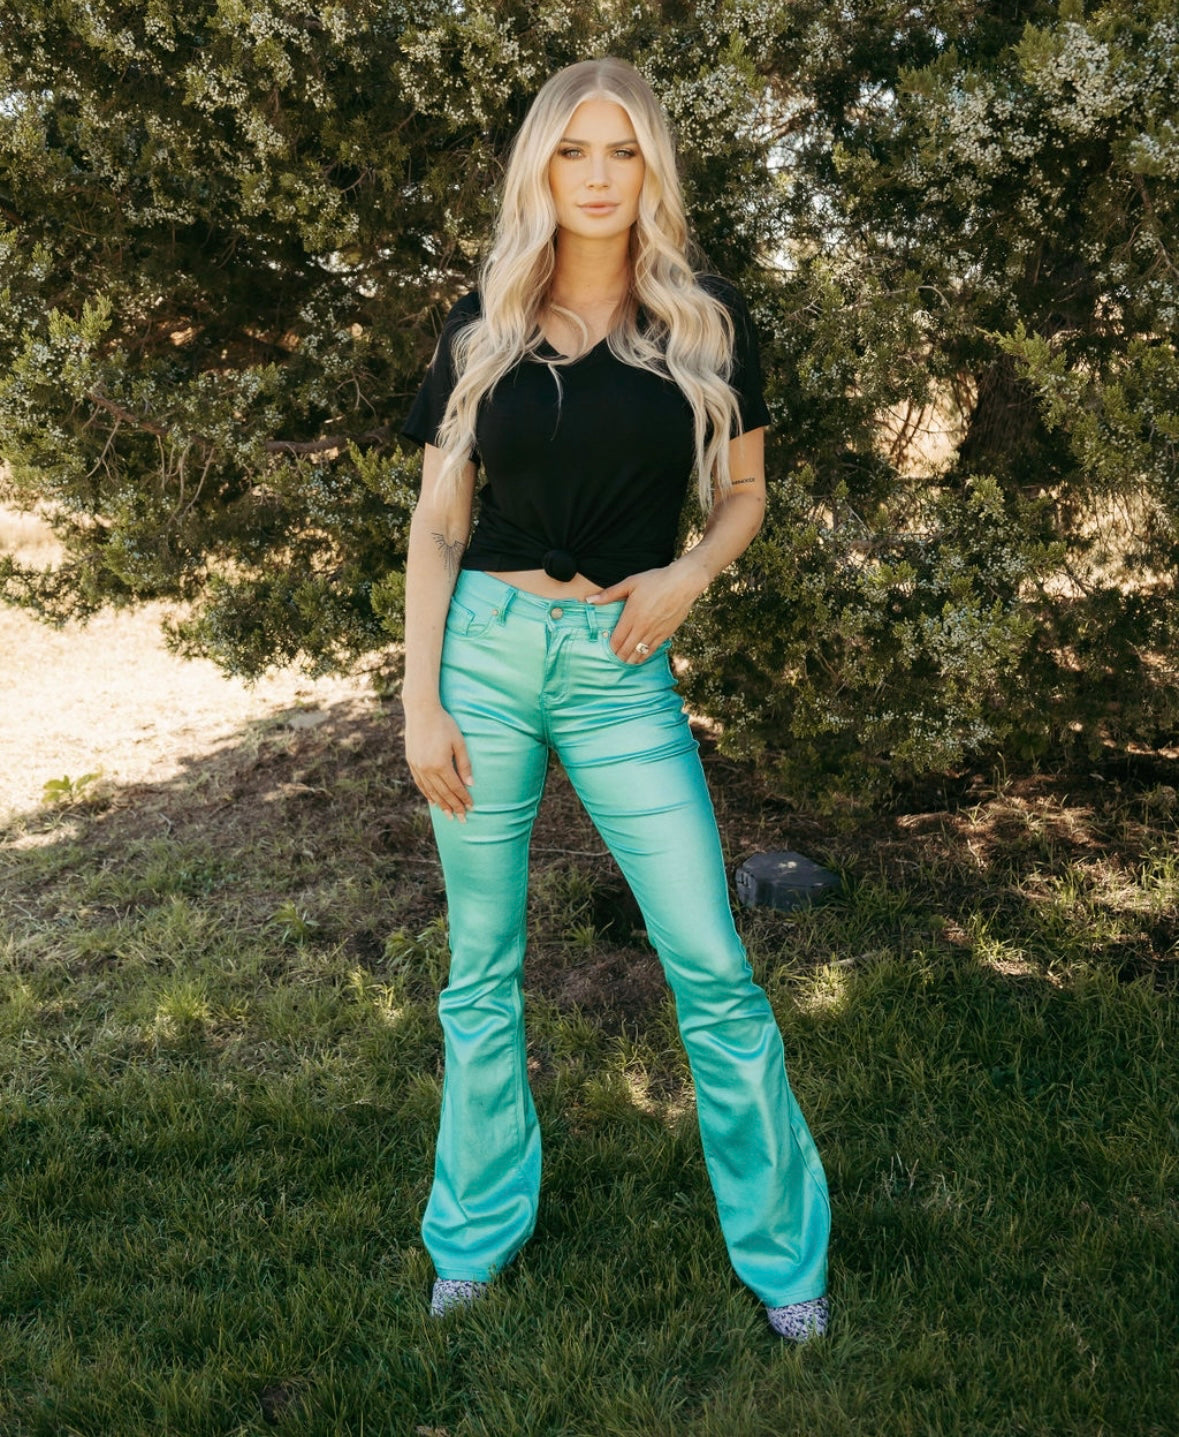 ALL ABOUT THAT TURQUOISE FLARE JEANS!